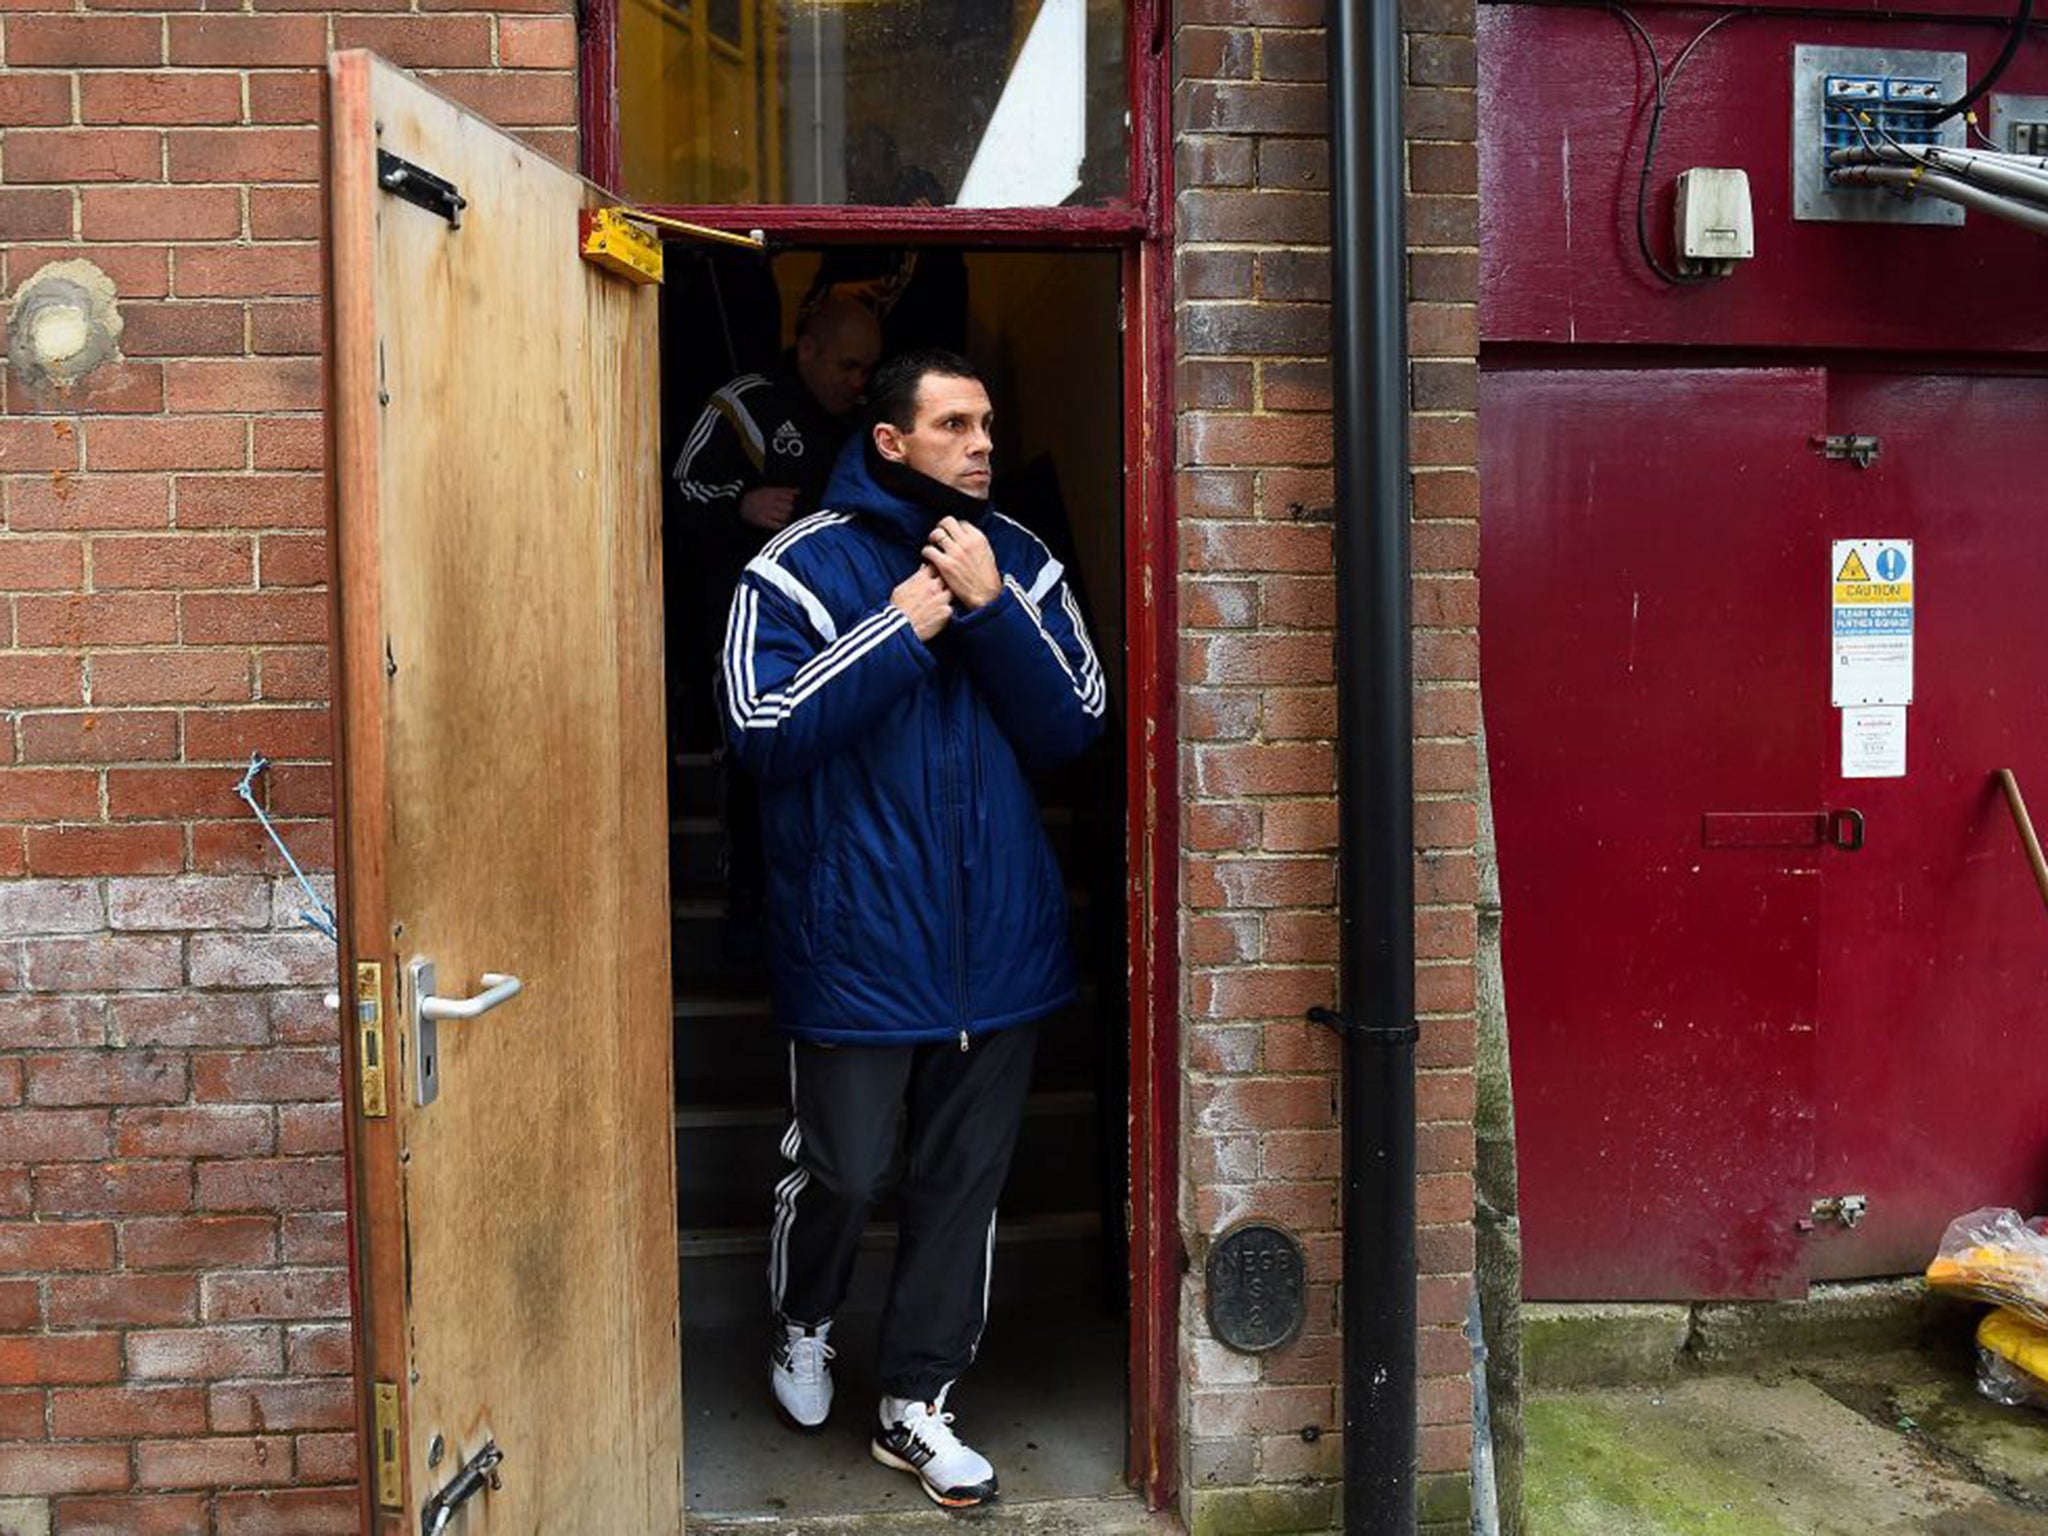 Sunderland manager Gus Poyet at Bradford City’s Valley Parade ground for their FA Cup fifth-round tie last month. His team were beaten 2-0 by the League One club